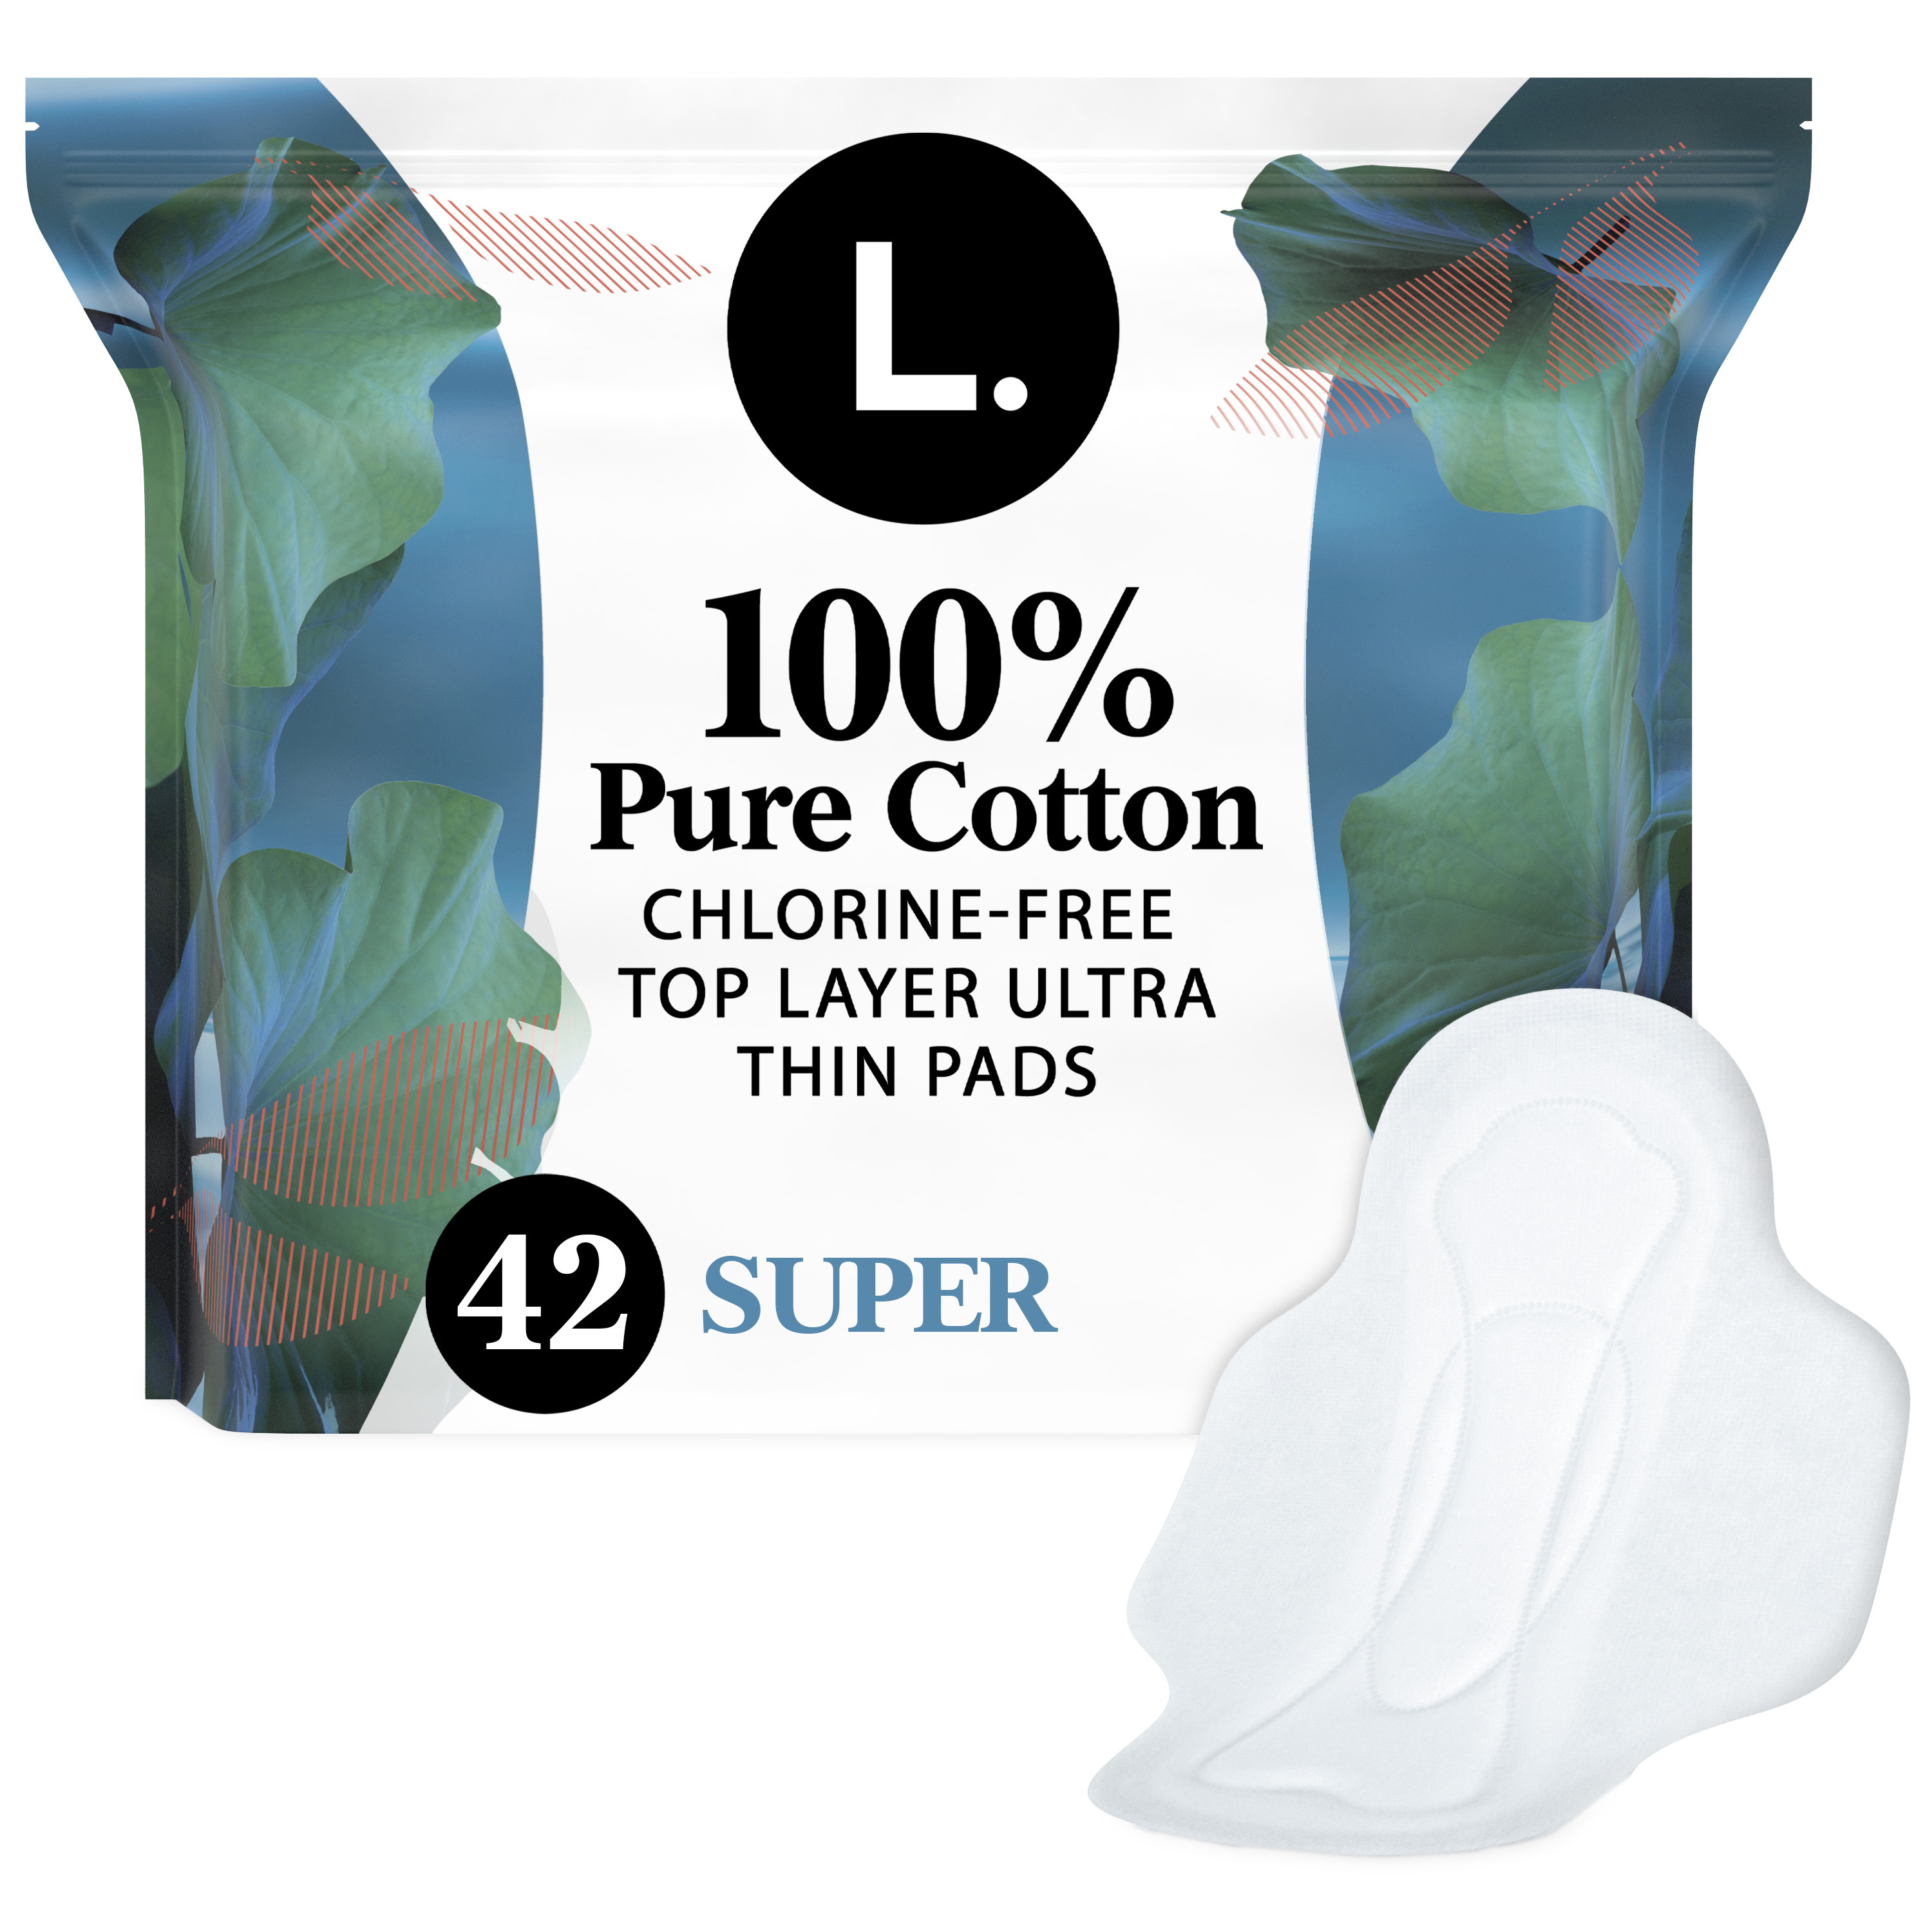 L. Ultra Thin Pads, Super Absorbency, 42 Ct, 100% Pure Cotton Top Layer - image 1 of 12